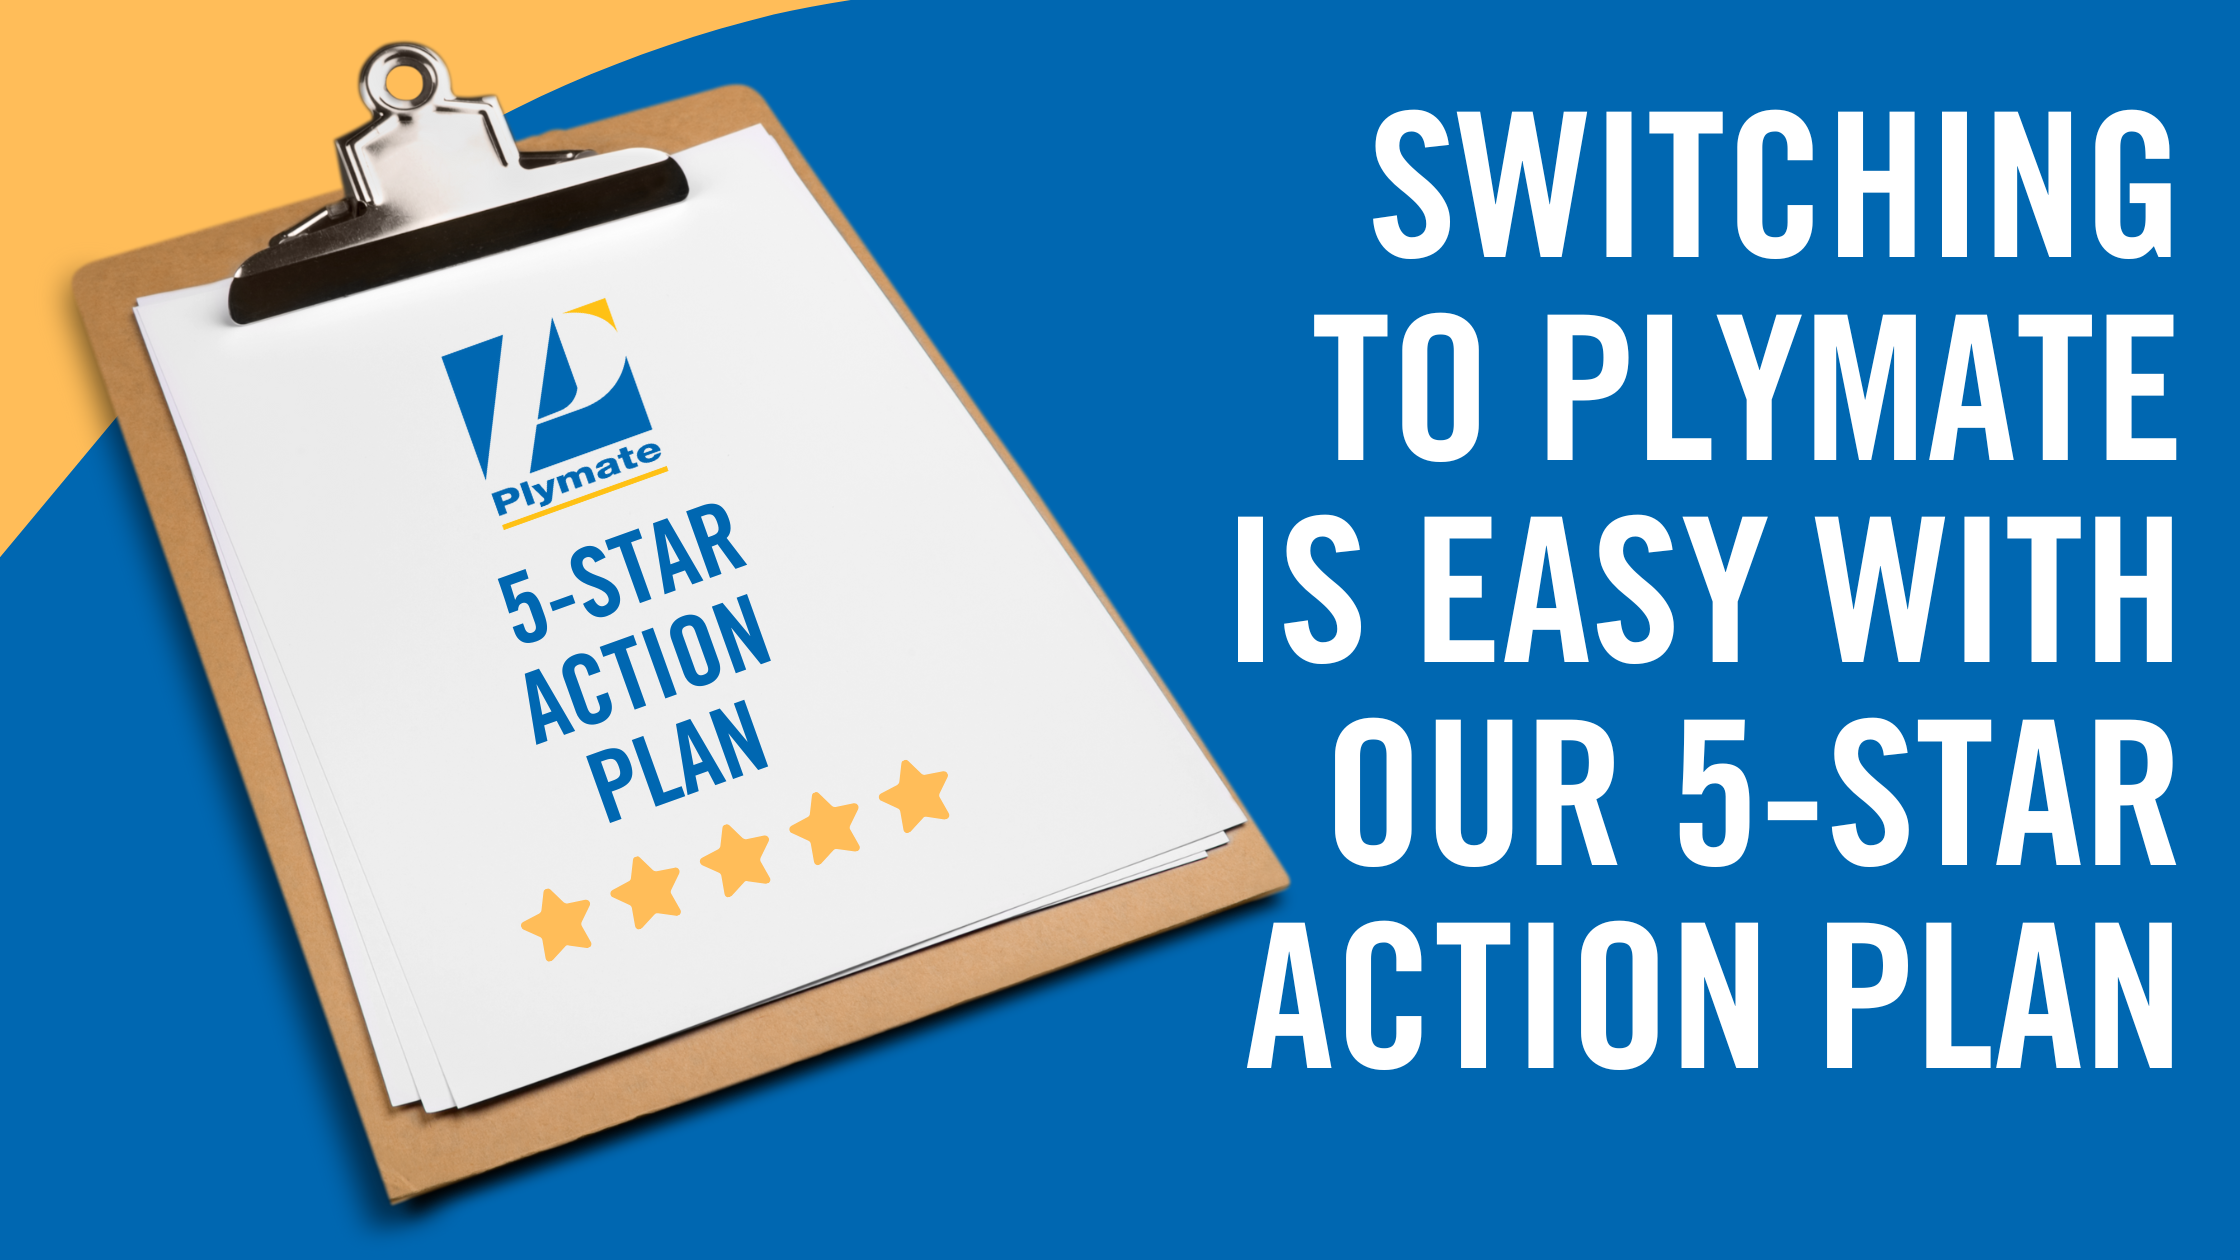 Switching to Plymate is Easy with Our 5-Star Action Plan